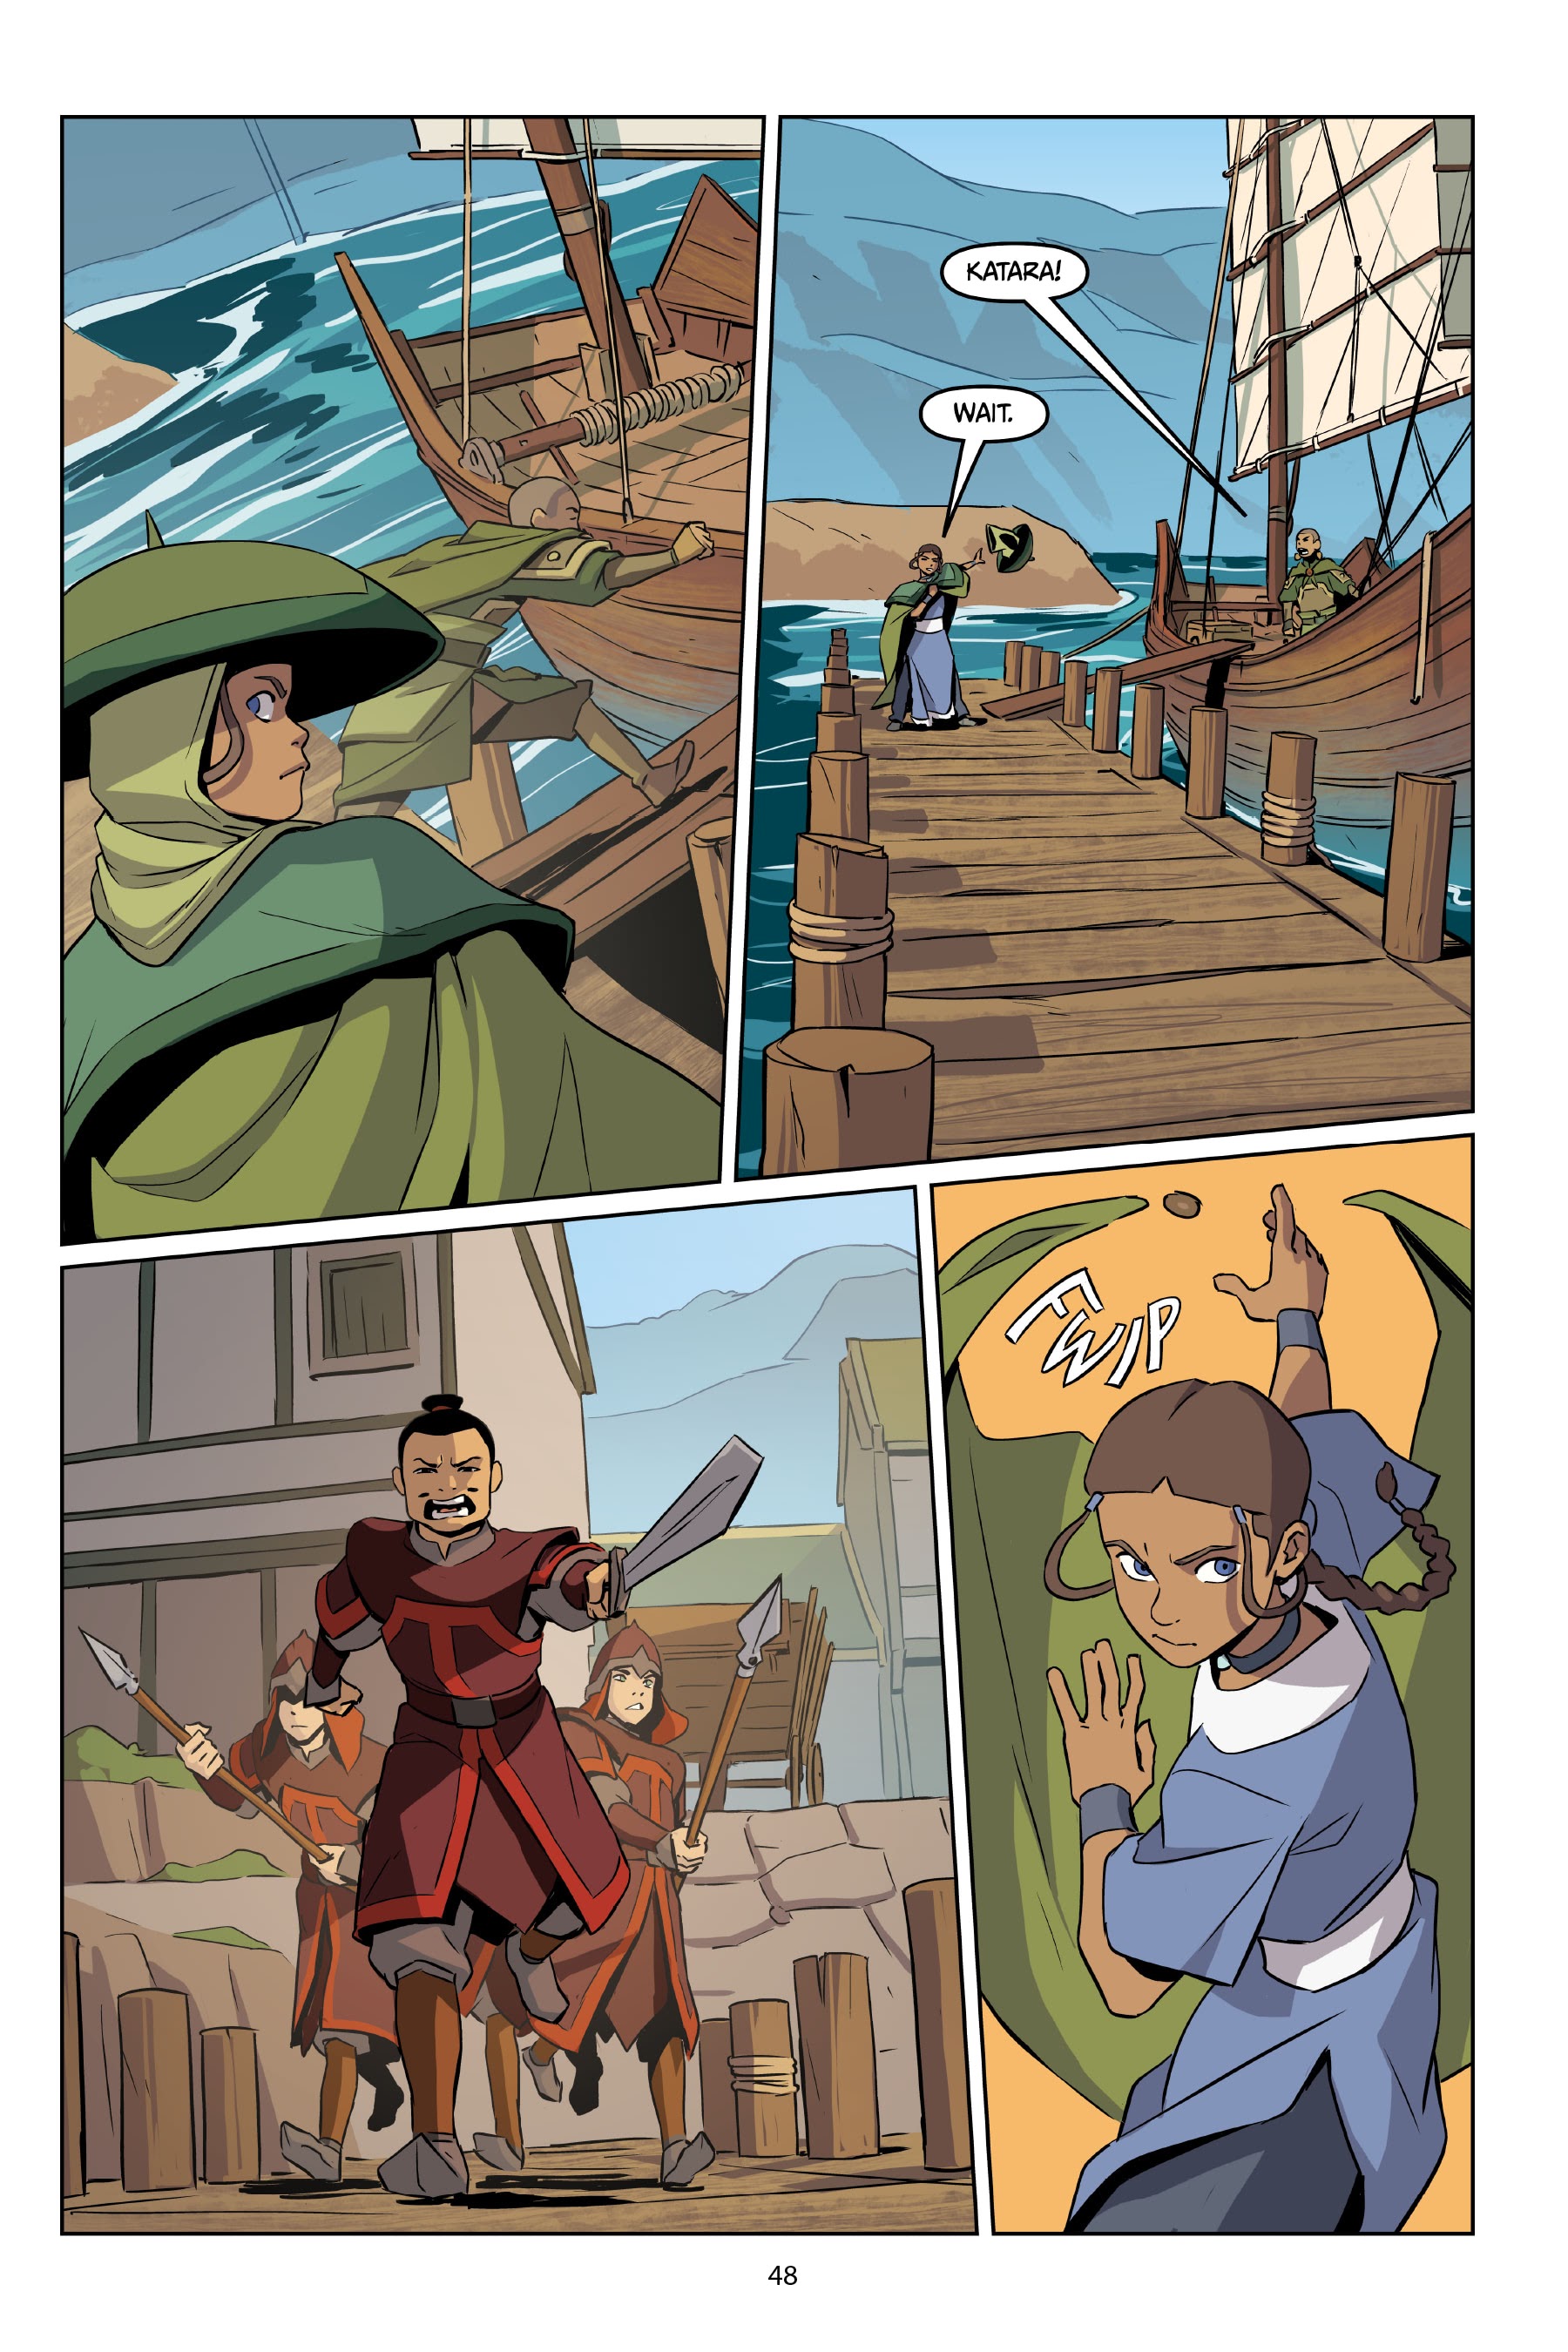 Read online Avatar: The Last Airbender—Katara and the Pirate's Silver comic -  Issue # TPB - 49